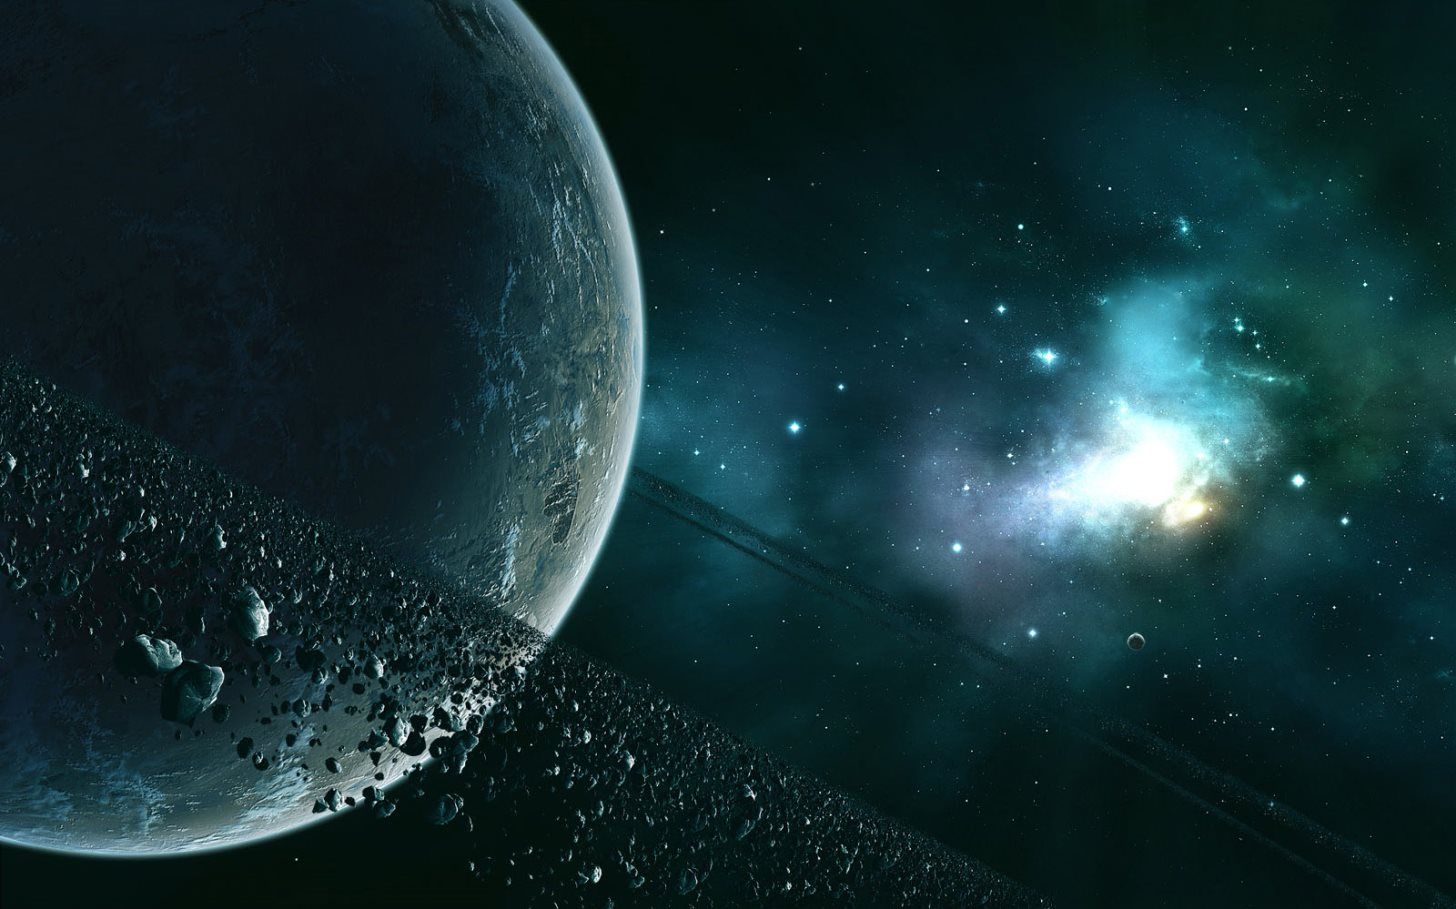 Space Live Wallpaper For Pc - [48+] Space Live Wallpapers For Desktop